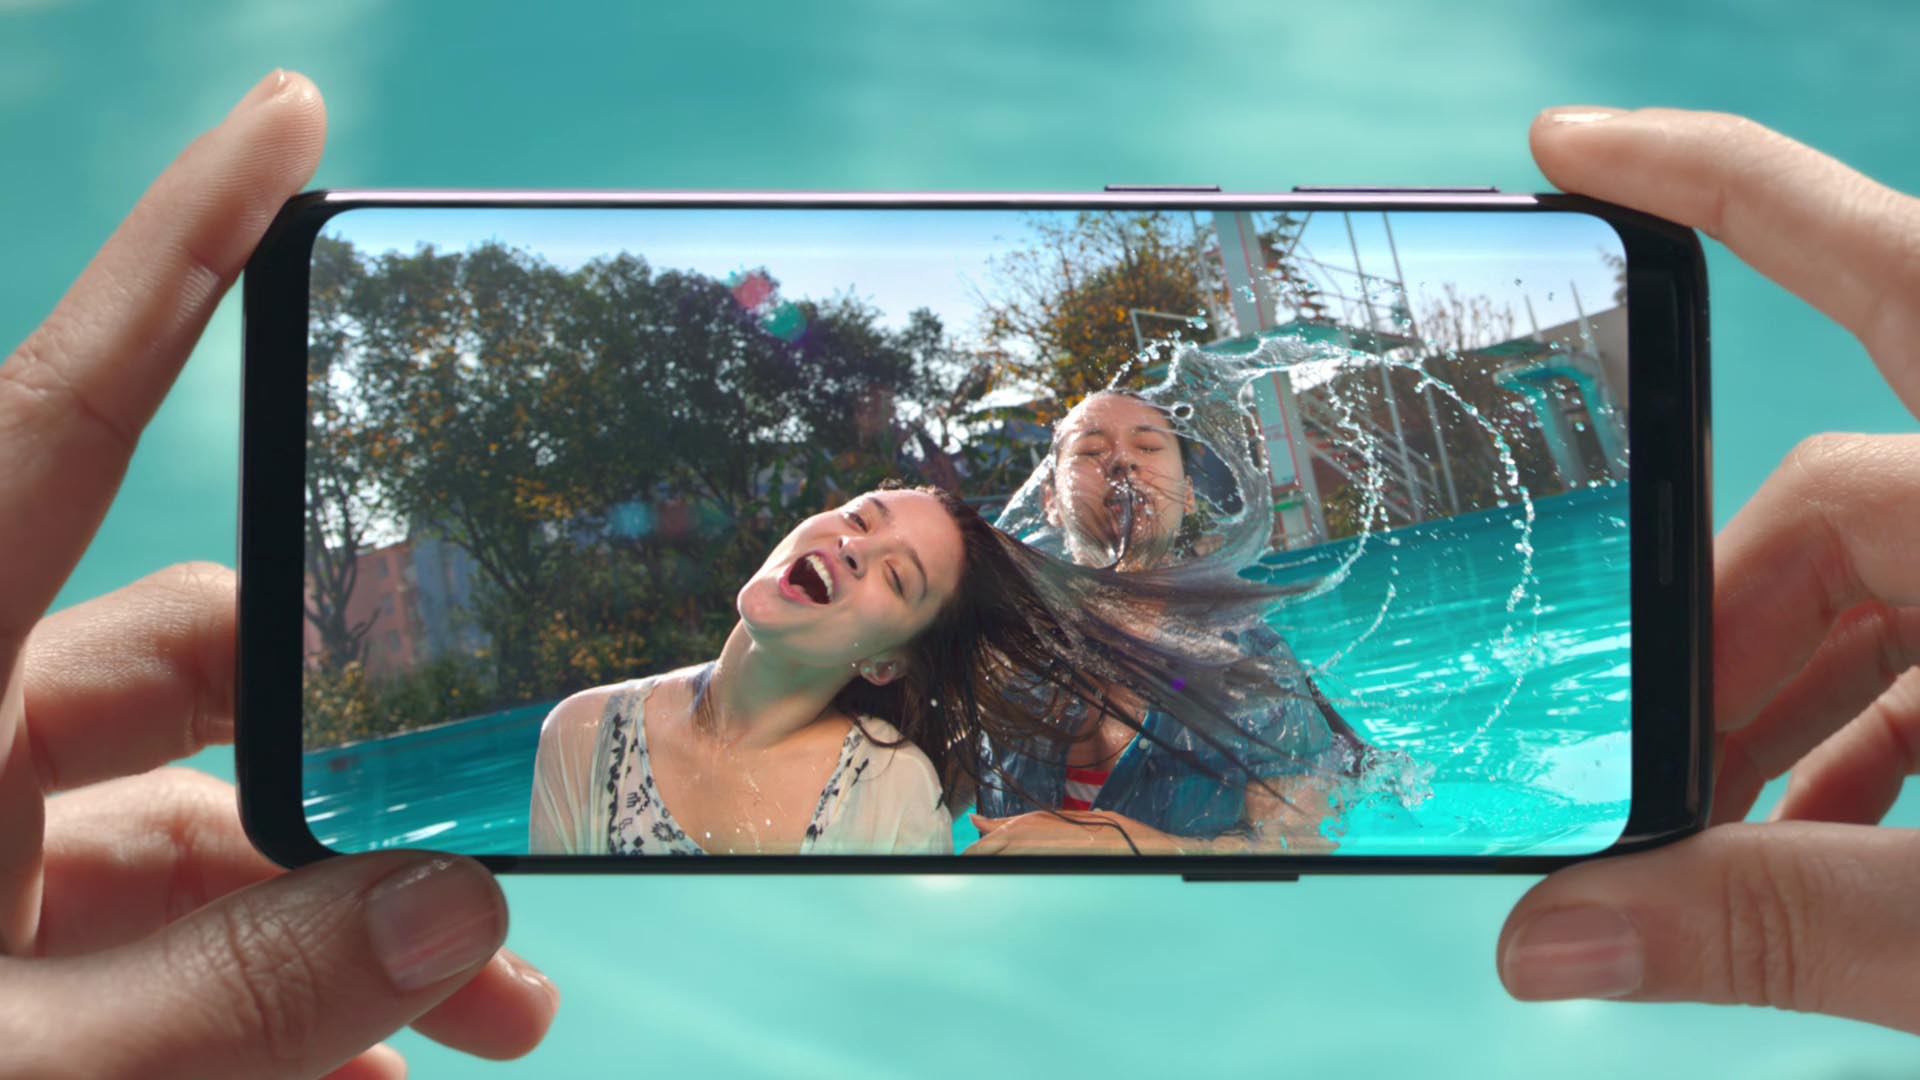 SAMSUNG Galaxy S9 and S9+’s Super-Slow Mo Feature